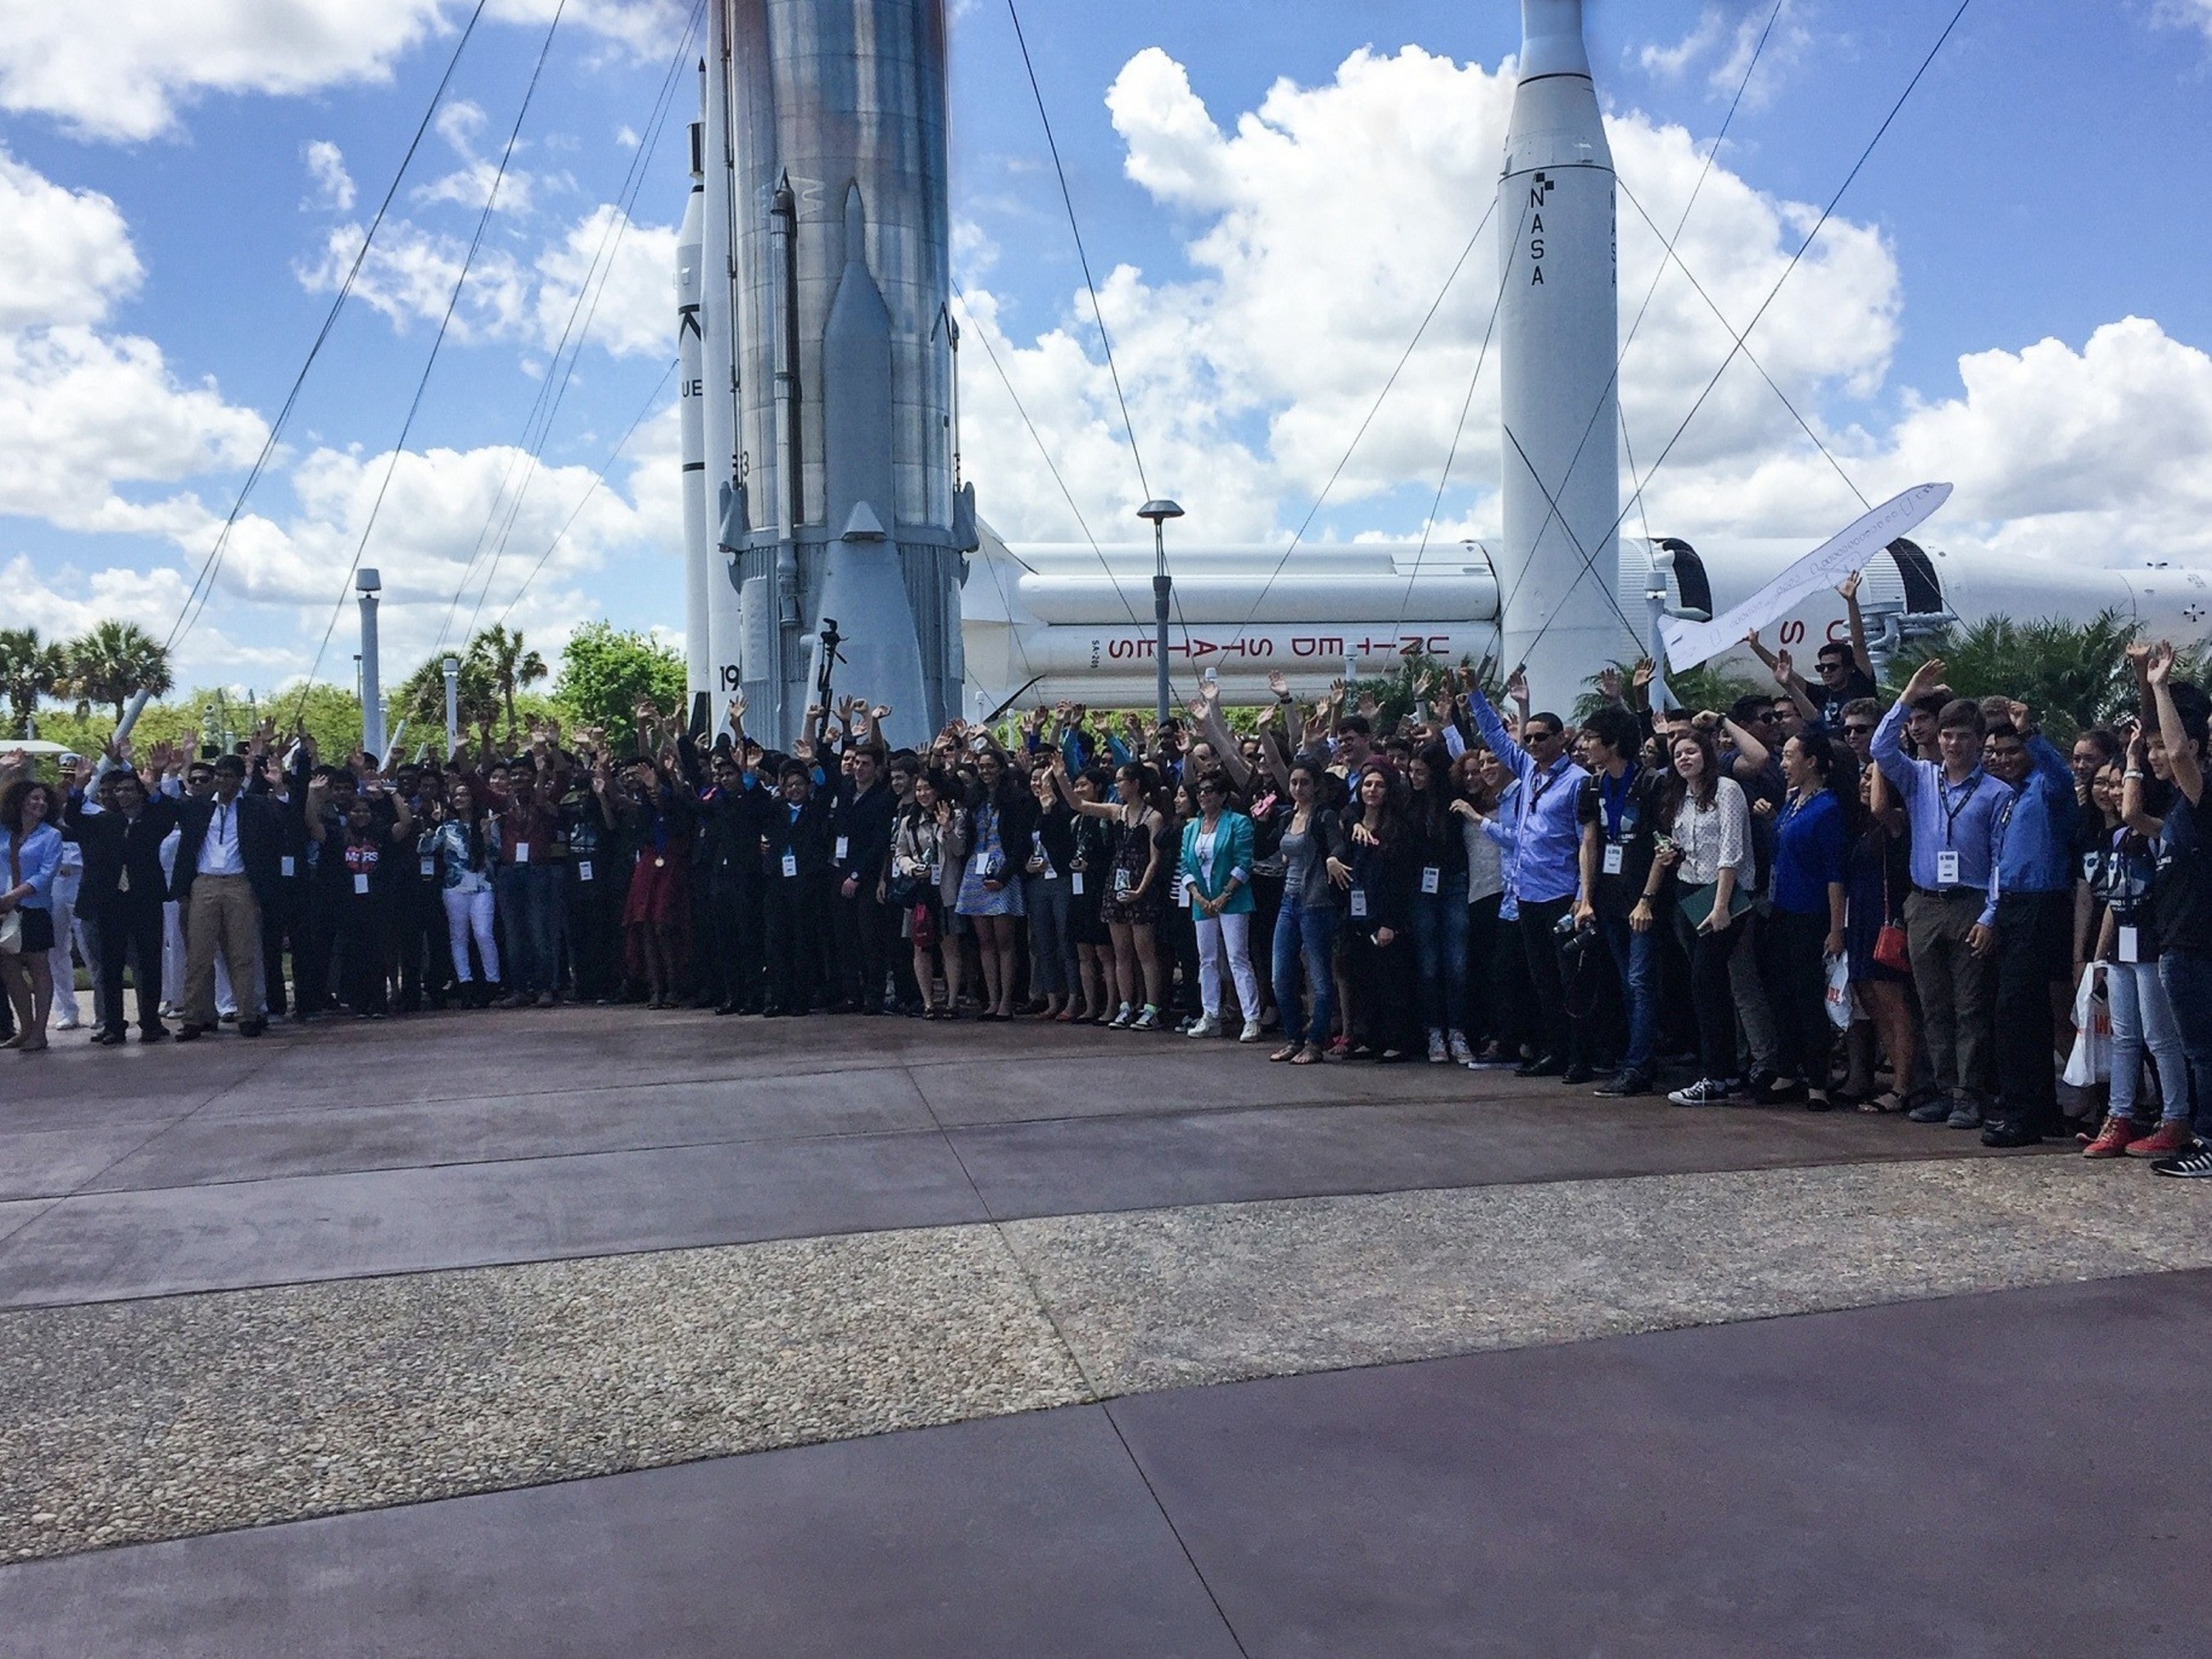 High school teams competed for top honors at the 10th annual Conrad Innovation Summit at NASA Kennedy Space Center Visitor Complex